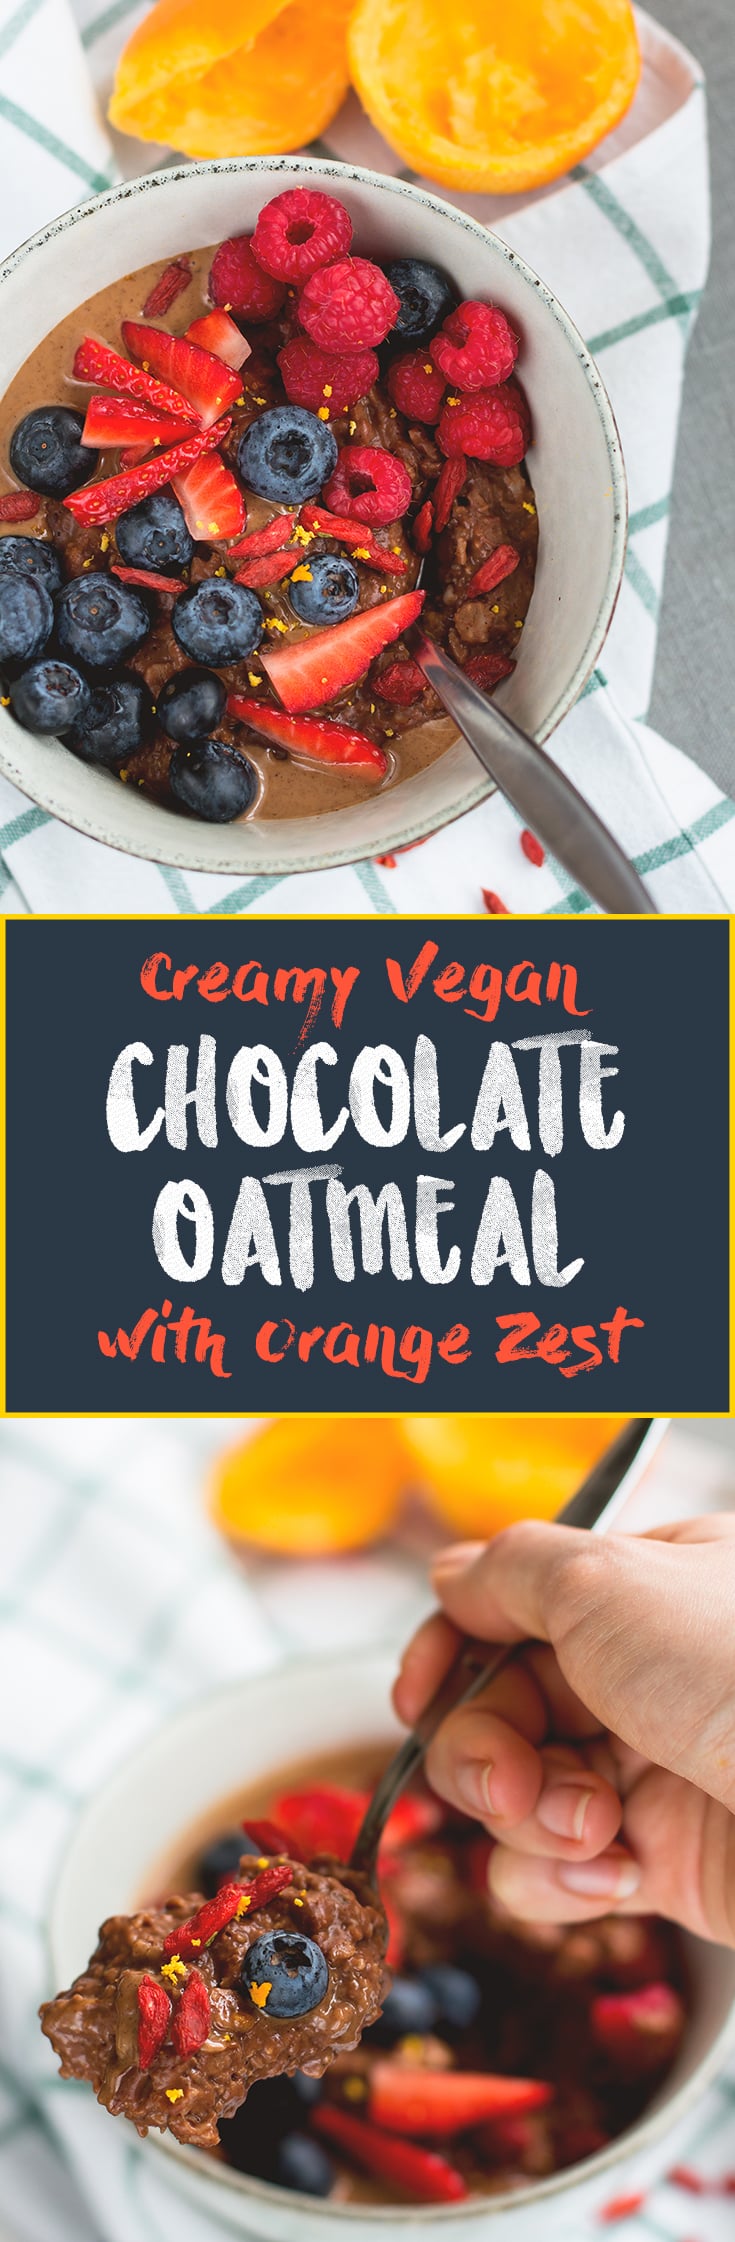 Chocolate Oatmeal with Orange Zest - delicious chocolatey oatmeal recipes that's easy to make and really tasty! I love the orange chocolate combiniation! This literally tastes like a dessert. Vegan, gluten-free, and good for you! | thehealthfulideas.com 